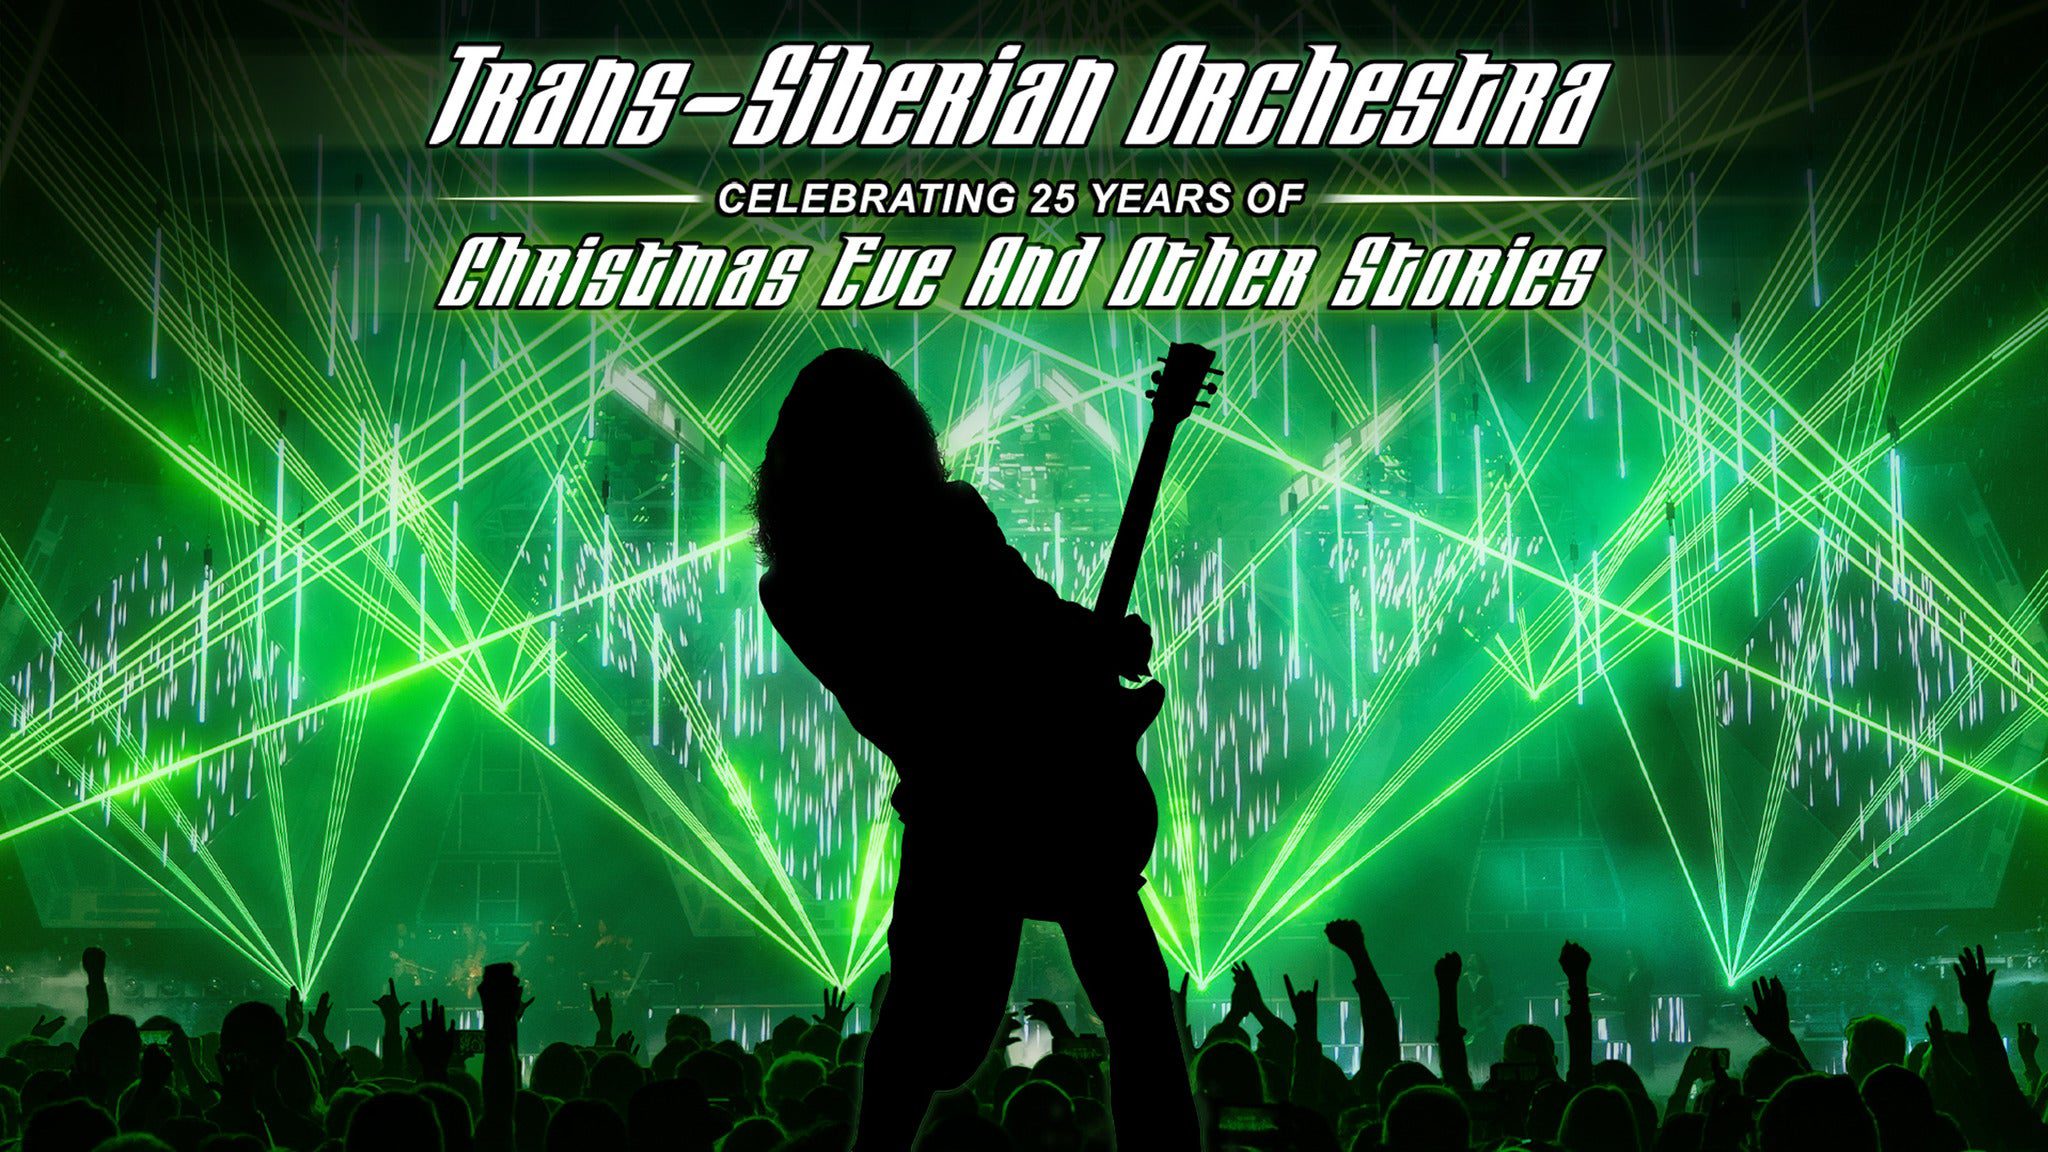 Trans Siberian Orchestra near Enclave at 3230